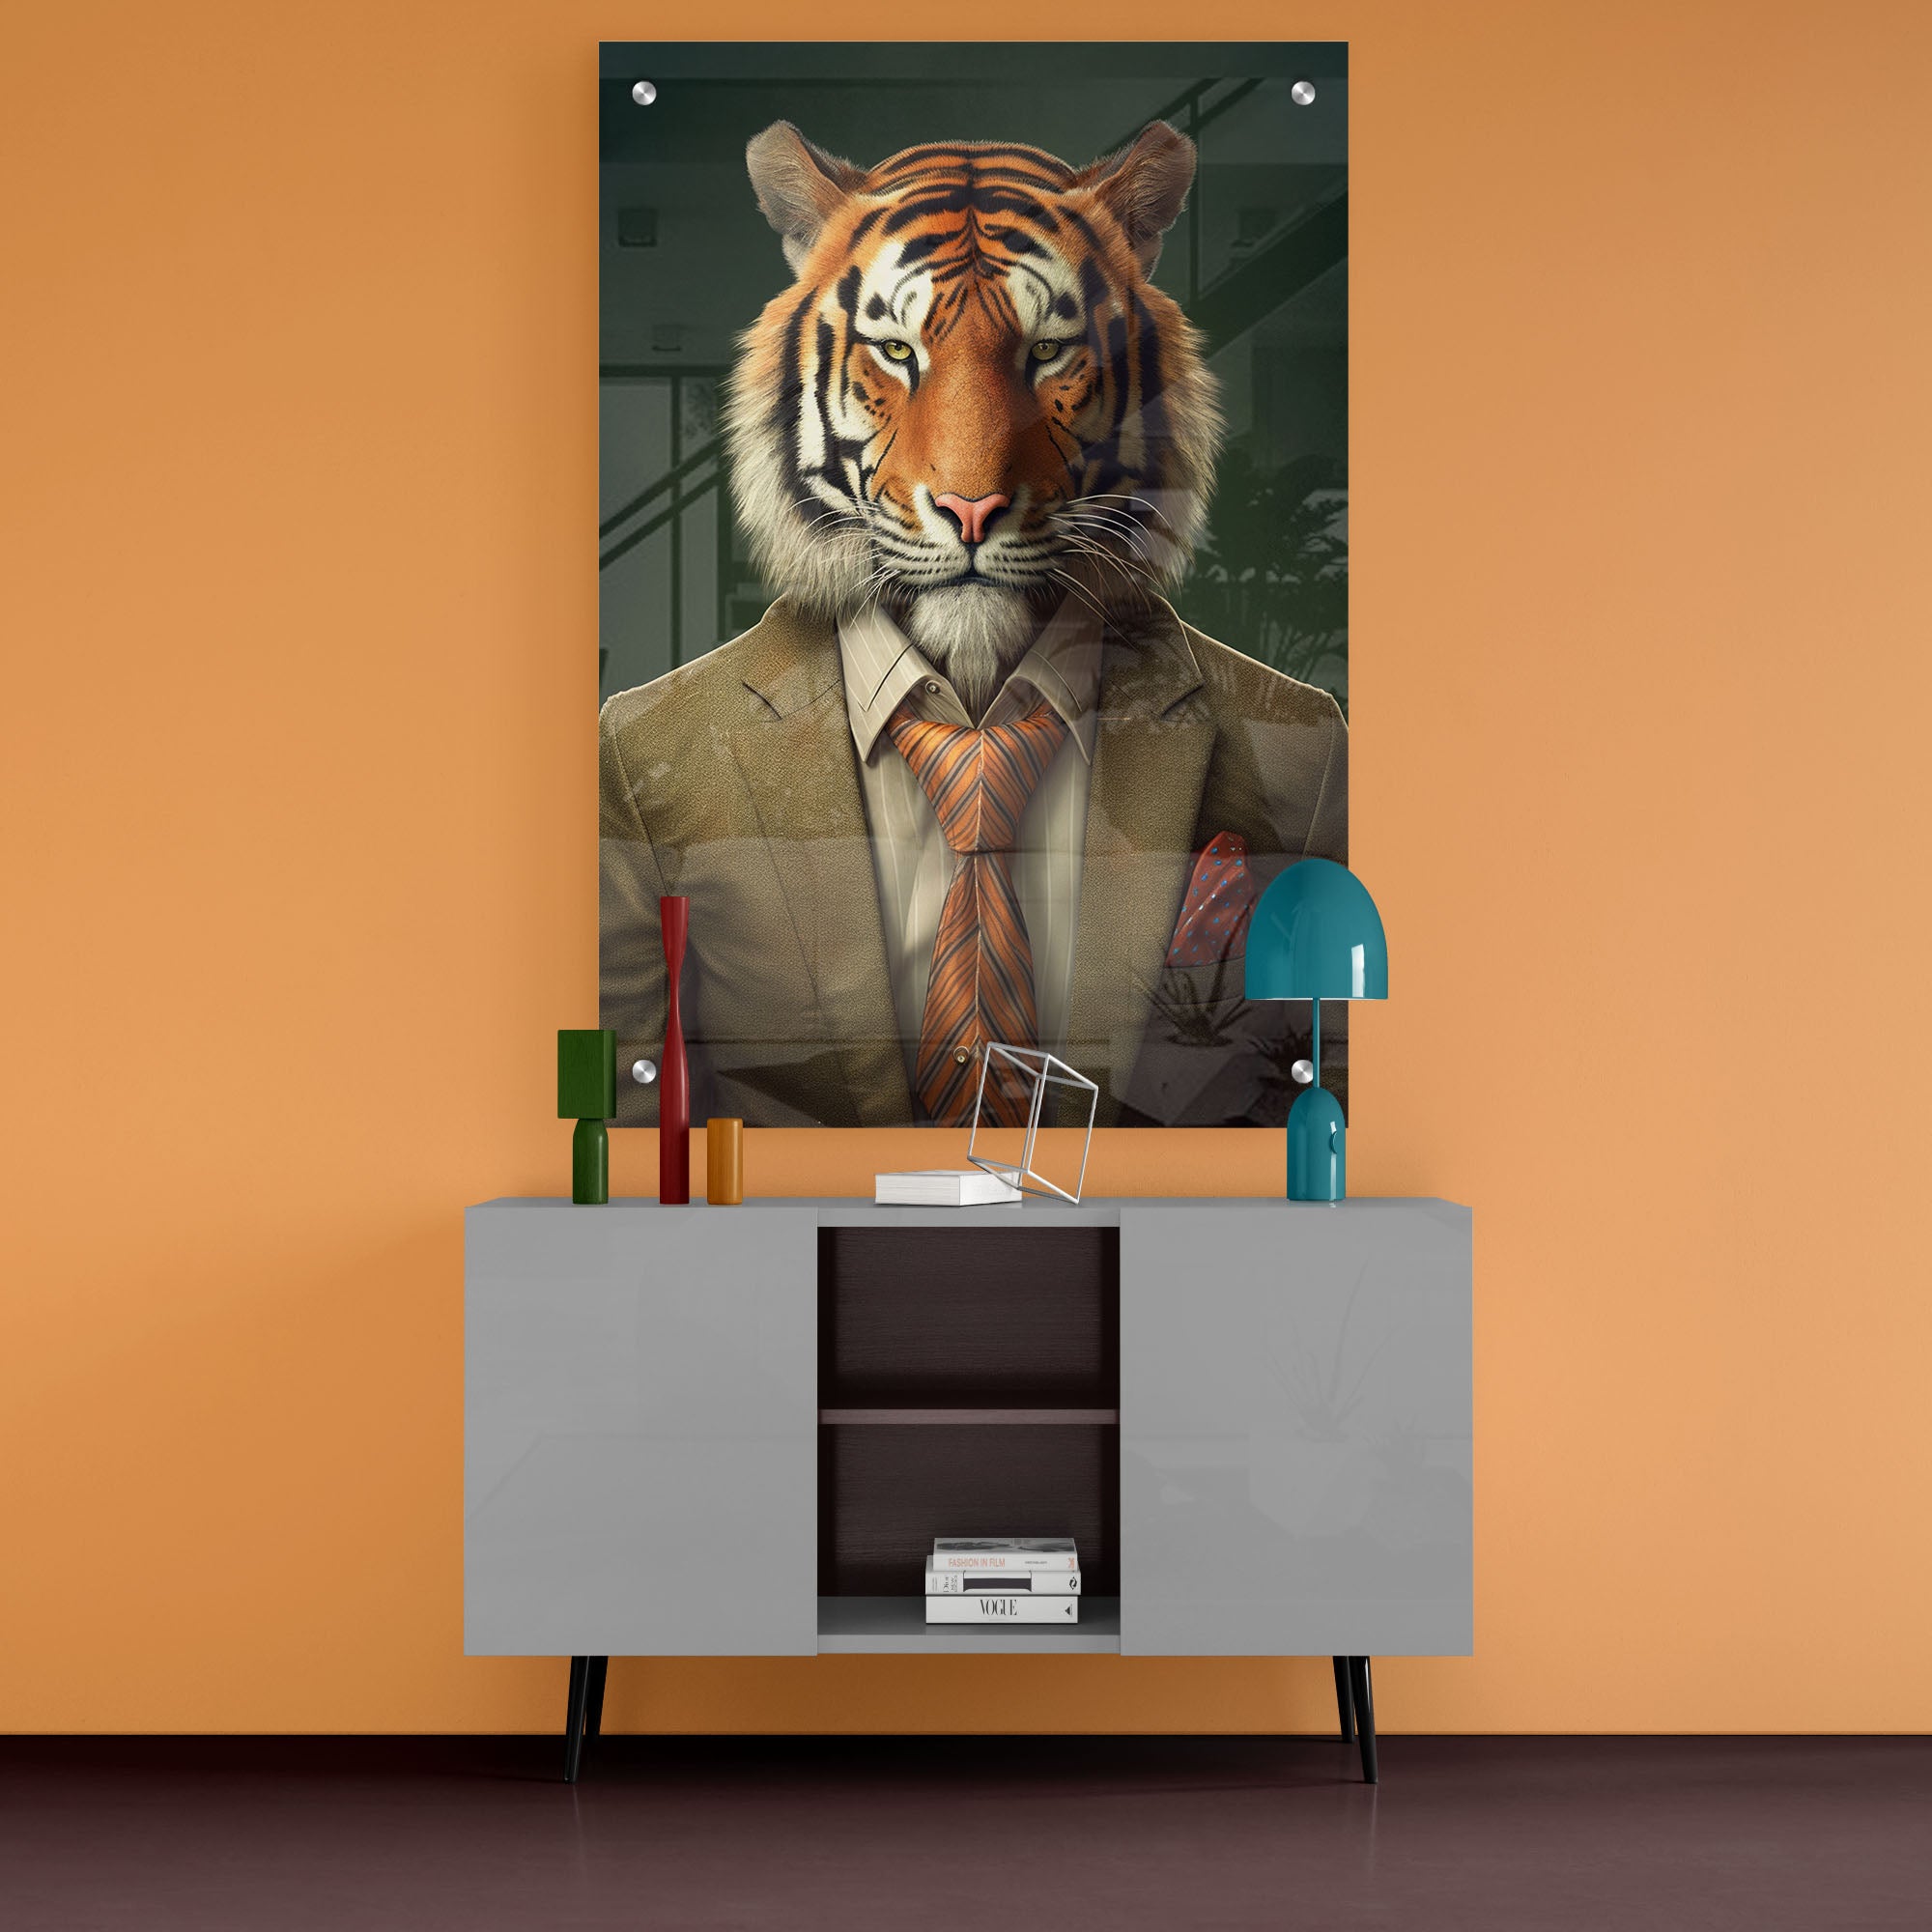 Tiger in Suit Acrylic Wall Painting